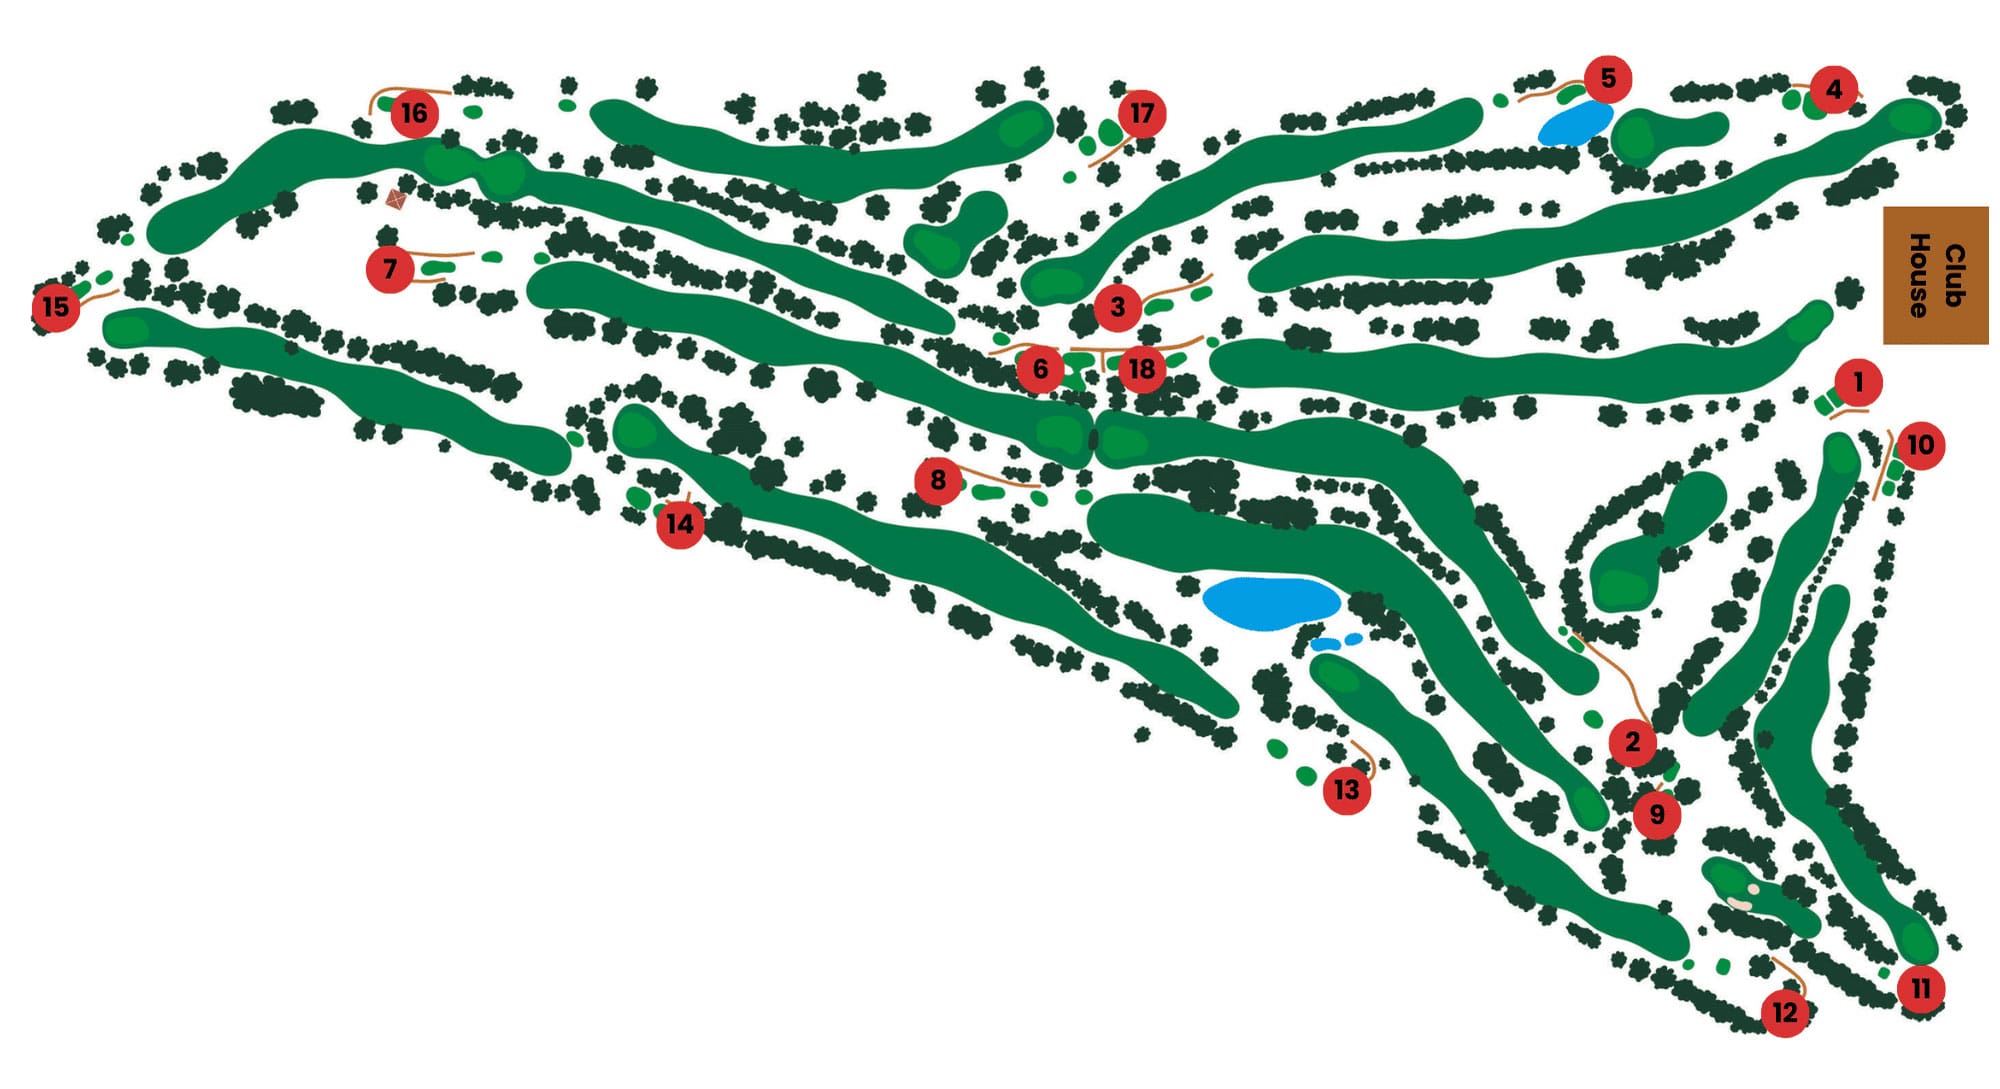 Course map with hole numbers